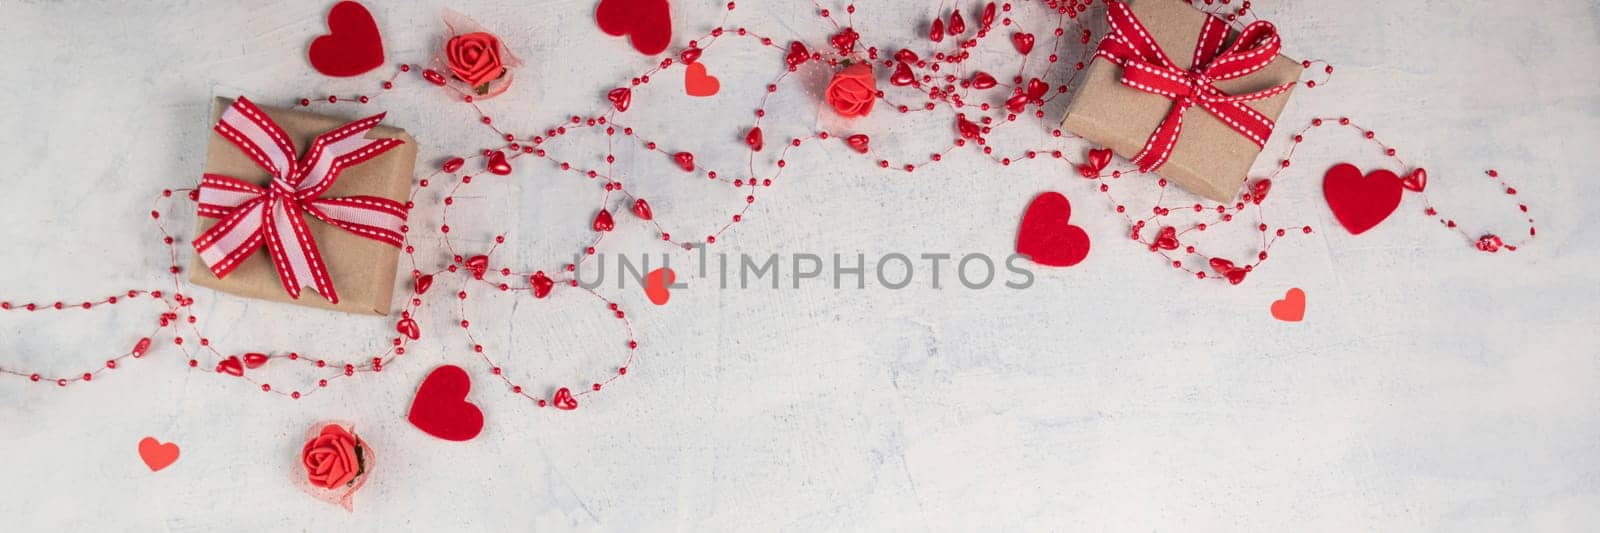 banner of two gifts with red ribbon on white textured background with red beads with hearts. background for valentine's day. flat lay by Leoschka